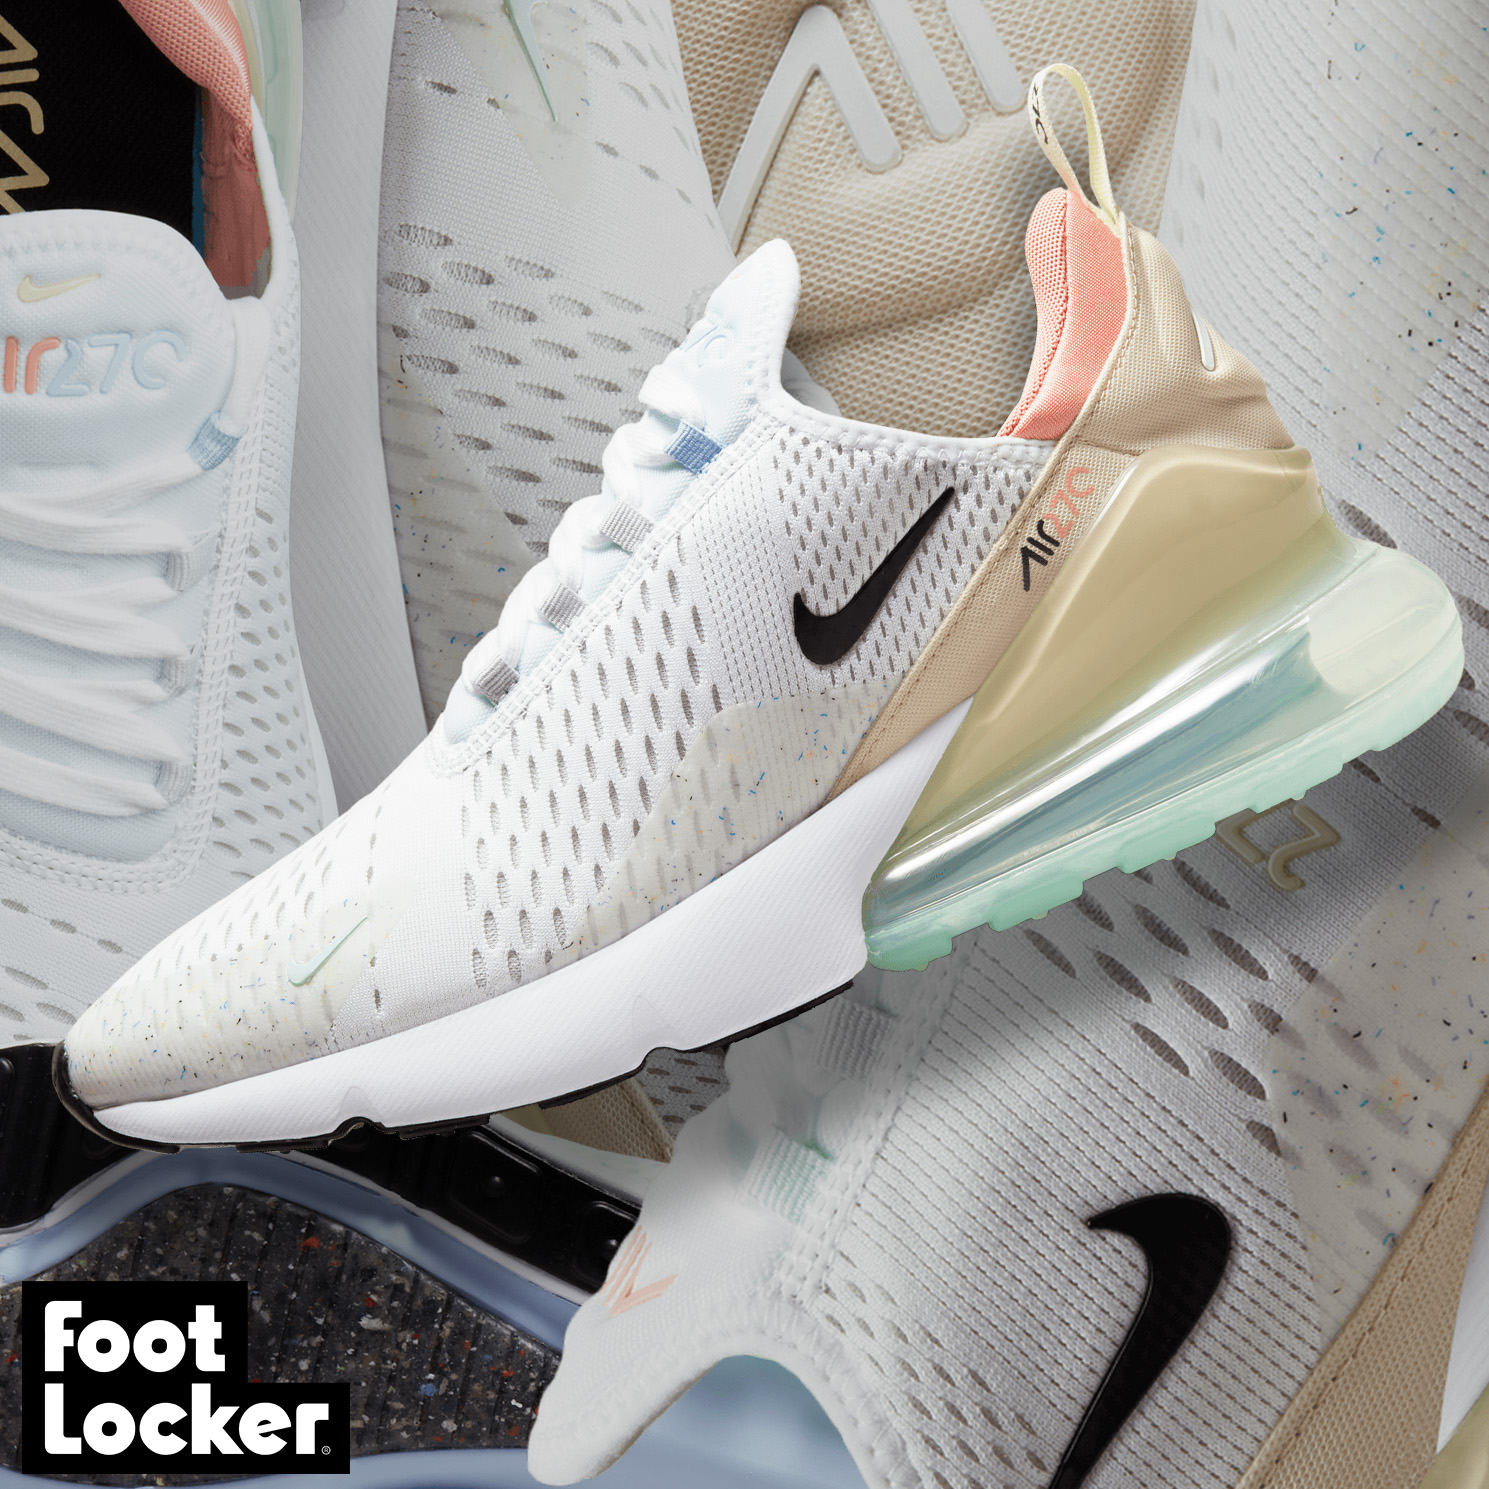 caminar Conejo constante Foot Locker on Twitter: "Spring ready 🔥 #Nike Air Max 270 available online  + select stores Shop: https://t.co/mWgE4B8s70 https://t.co/dFvSGqlasw" /  Twitter